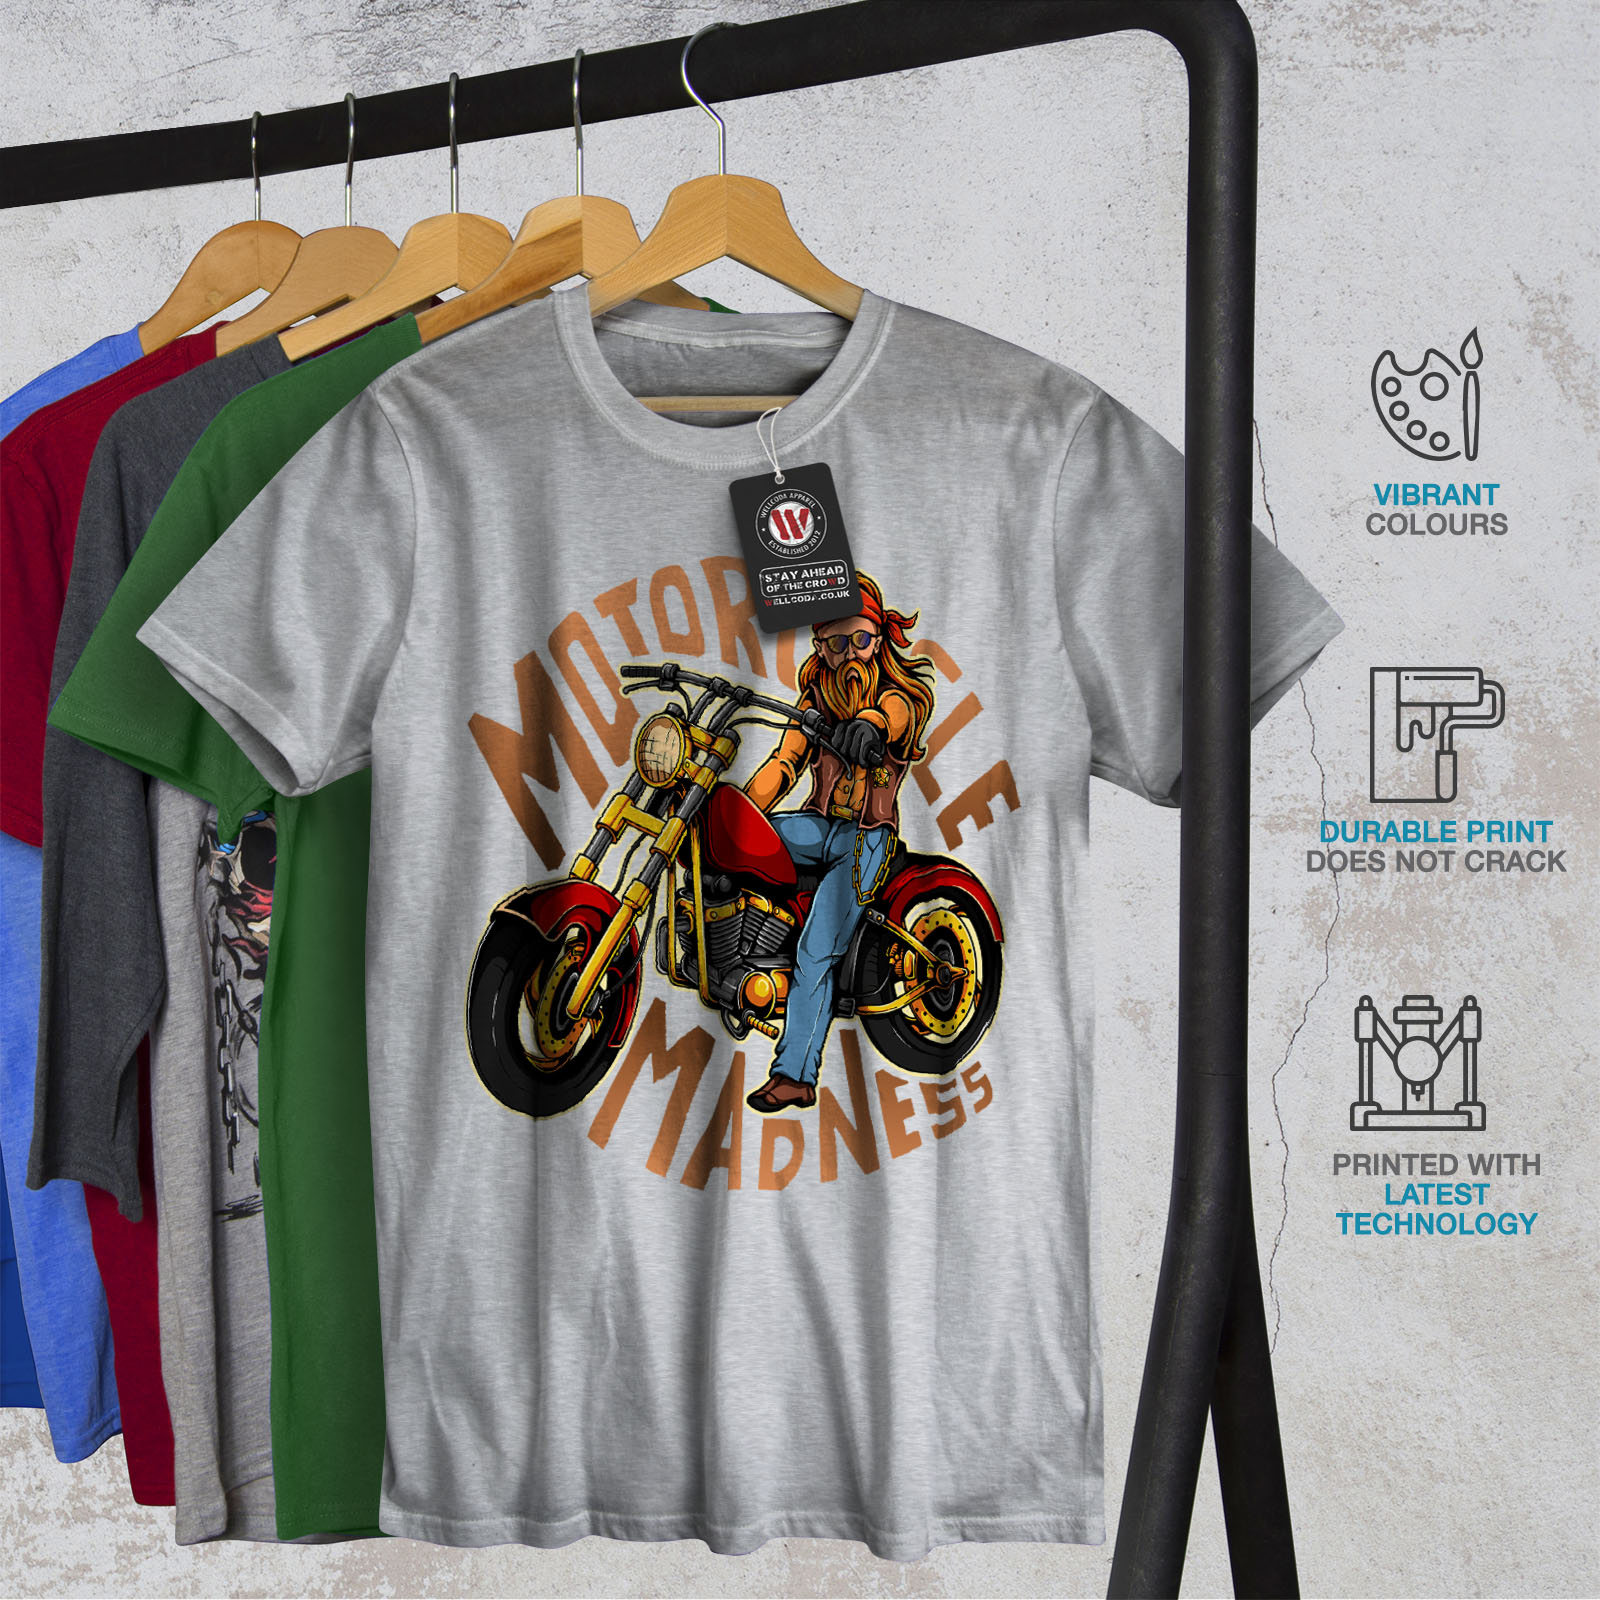 Wellcoda Motorcycle Madness Mens T-shirt, Vintage Graphic Design ...